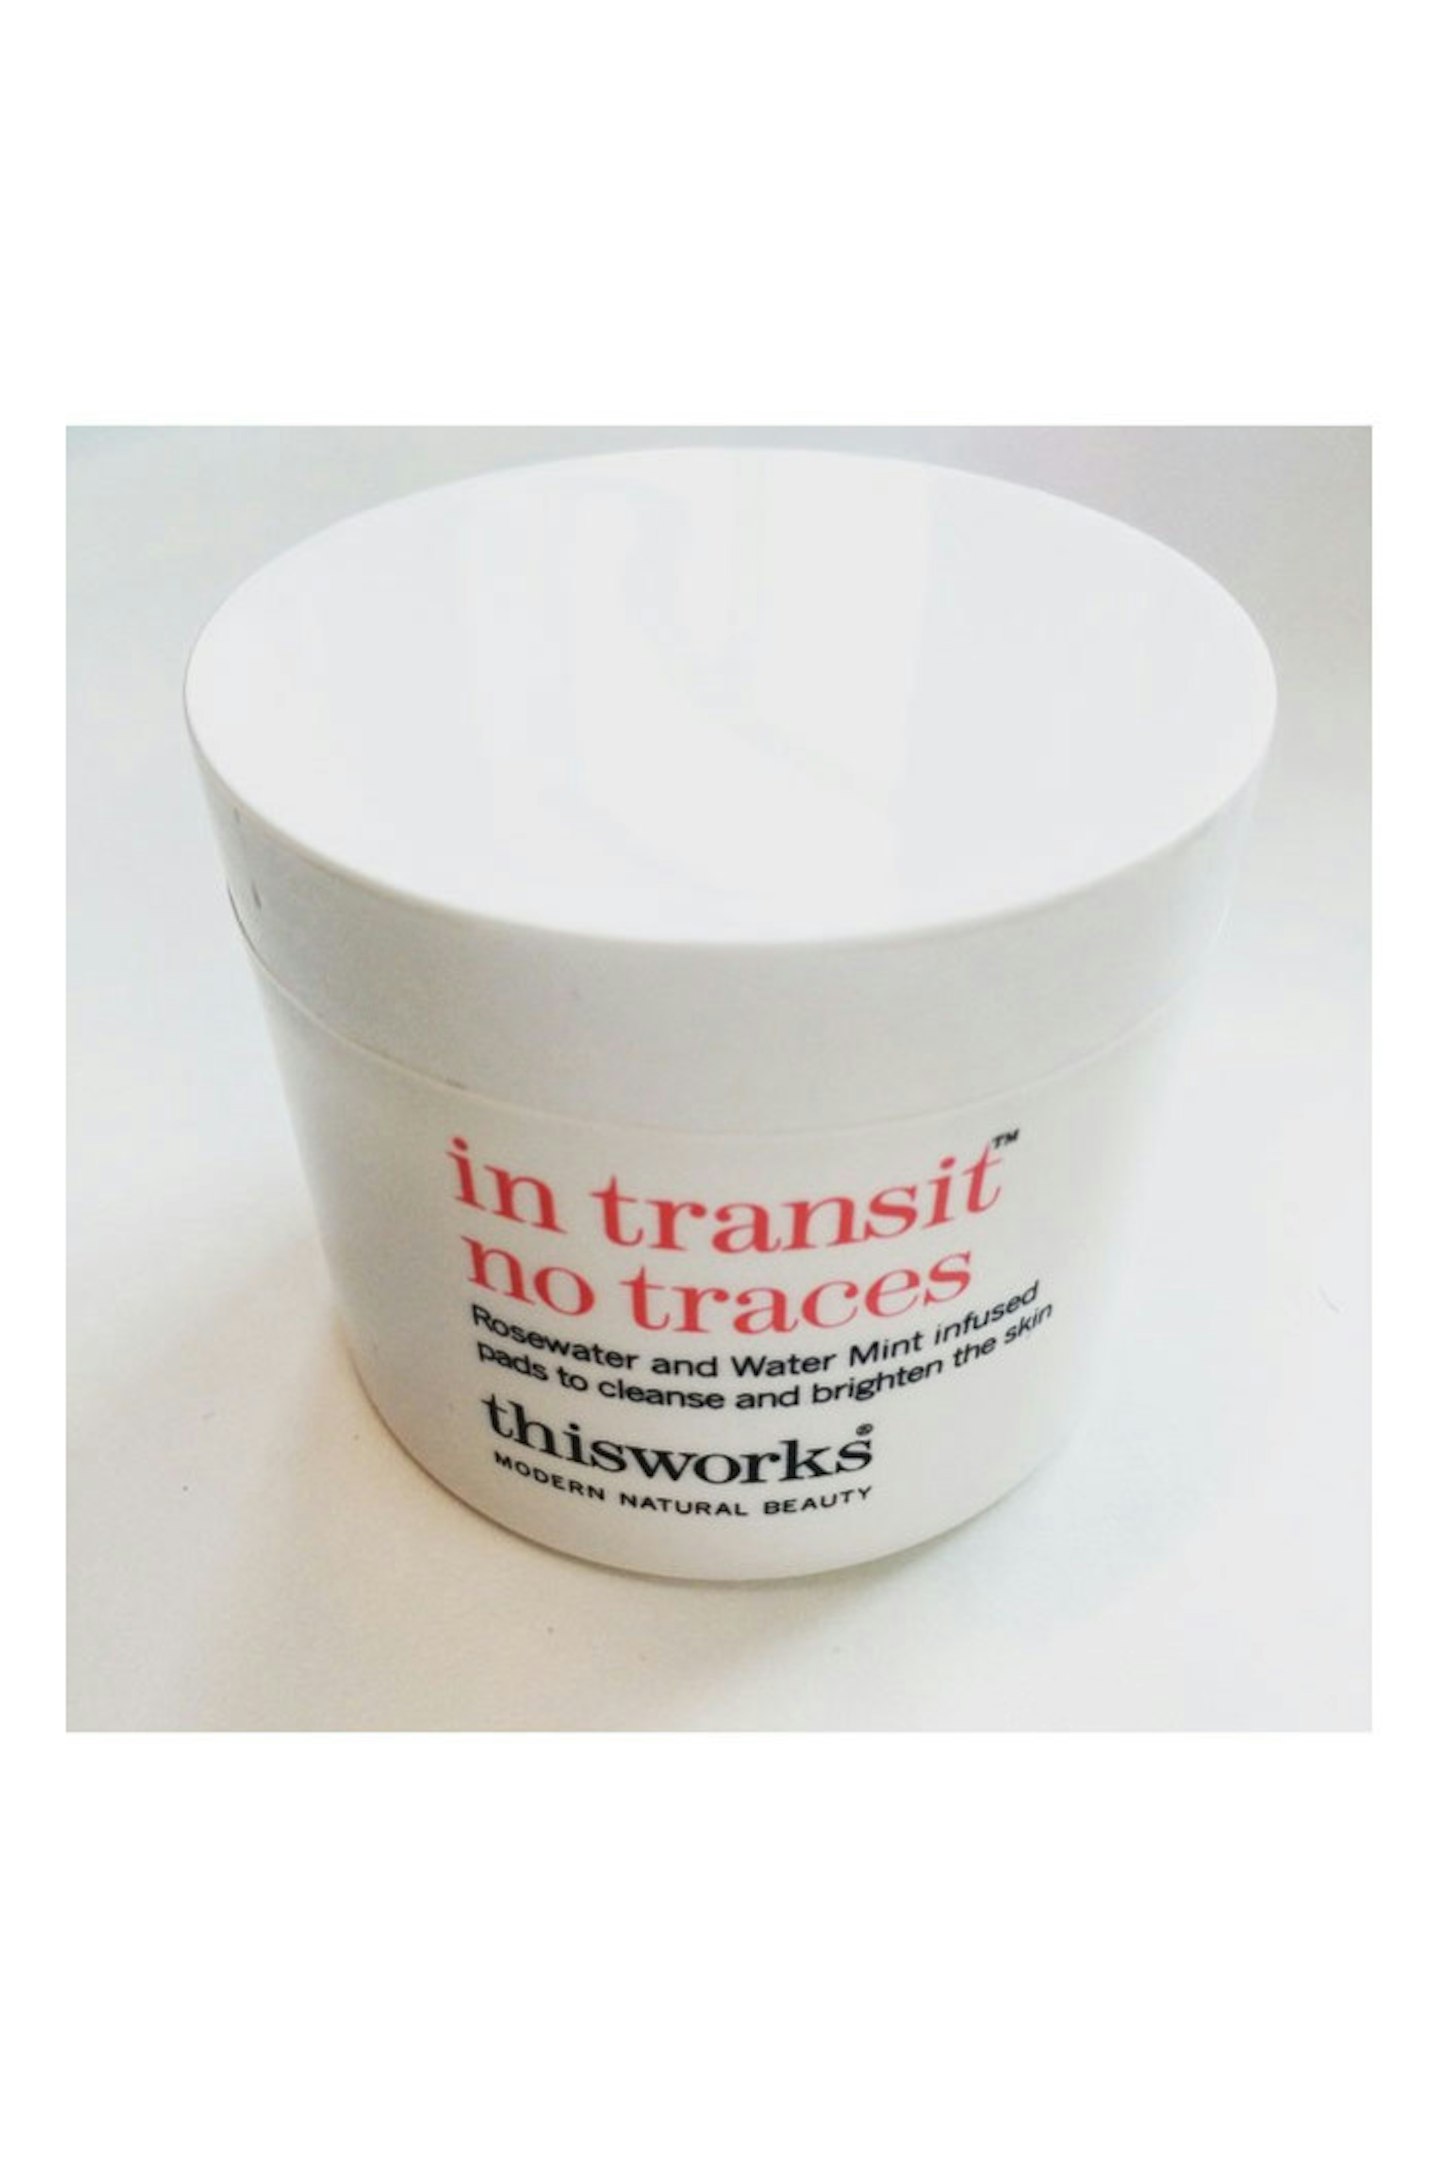 This Works In Transit No Traces, £17